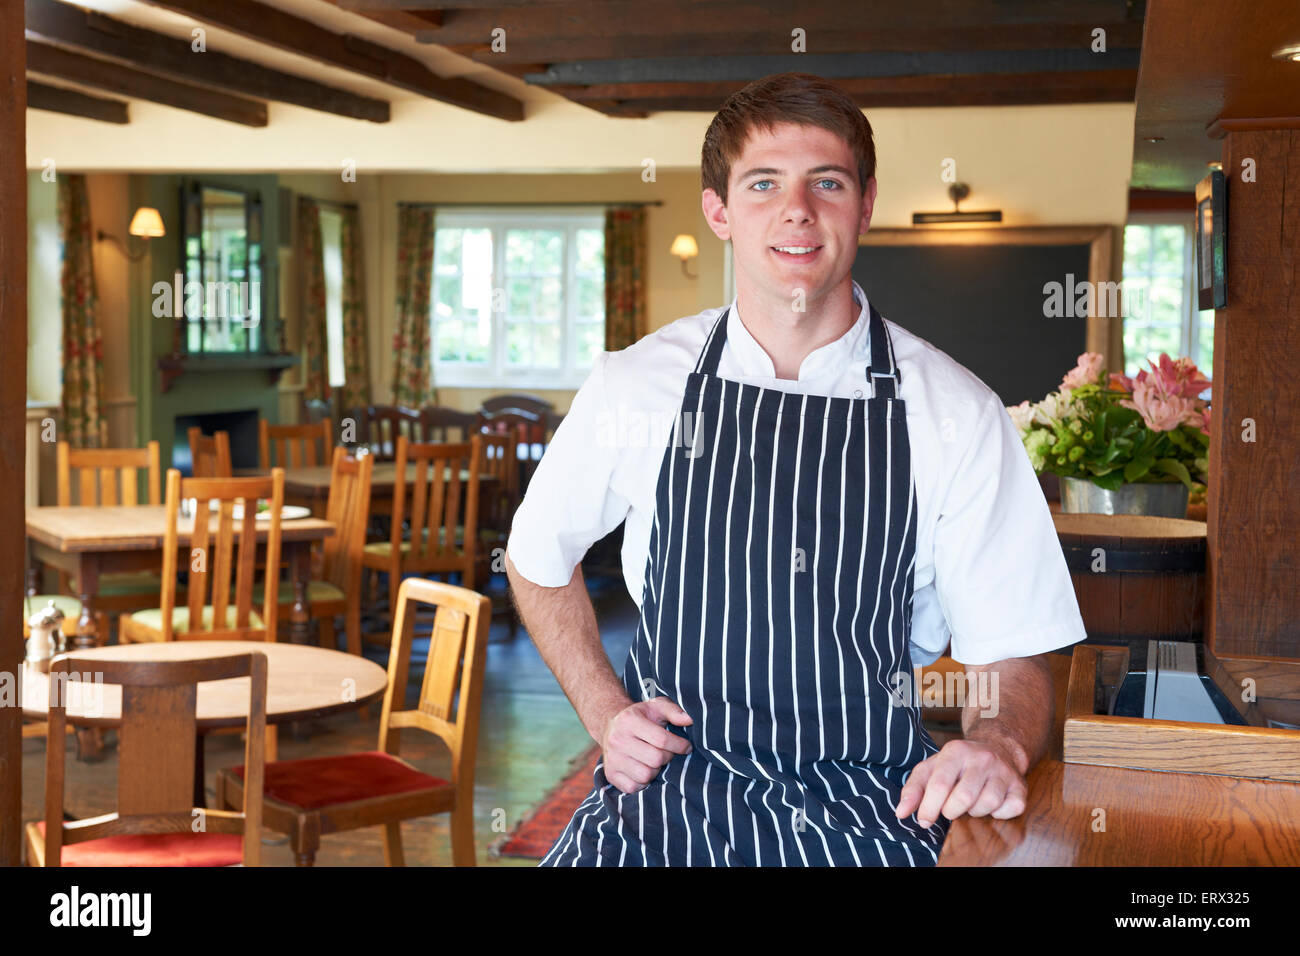 Chef Wearing Whites And Apron Sitting In Restaurant Stock Photo